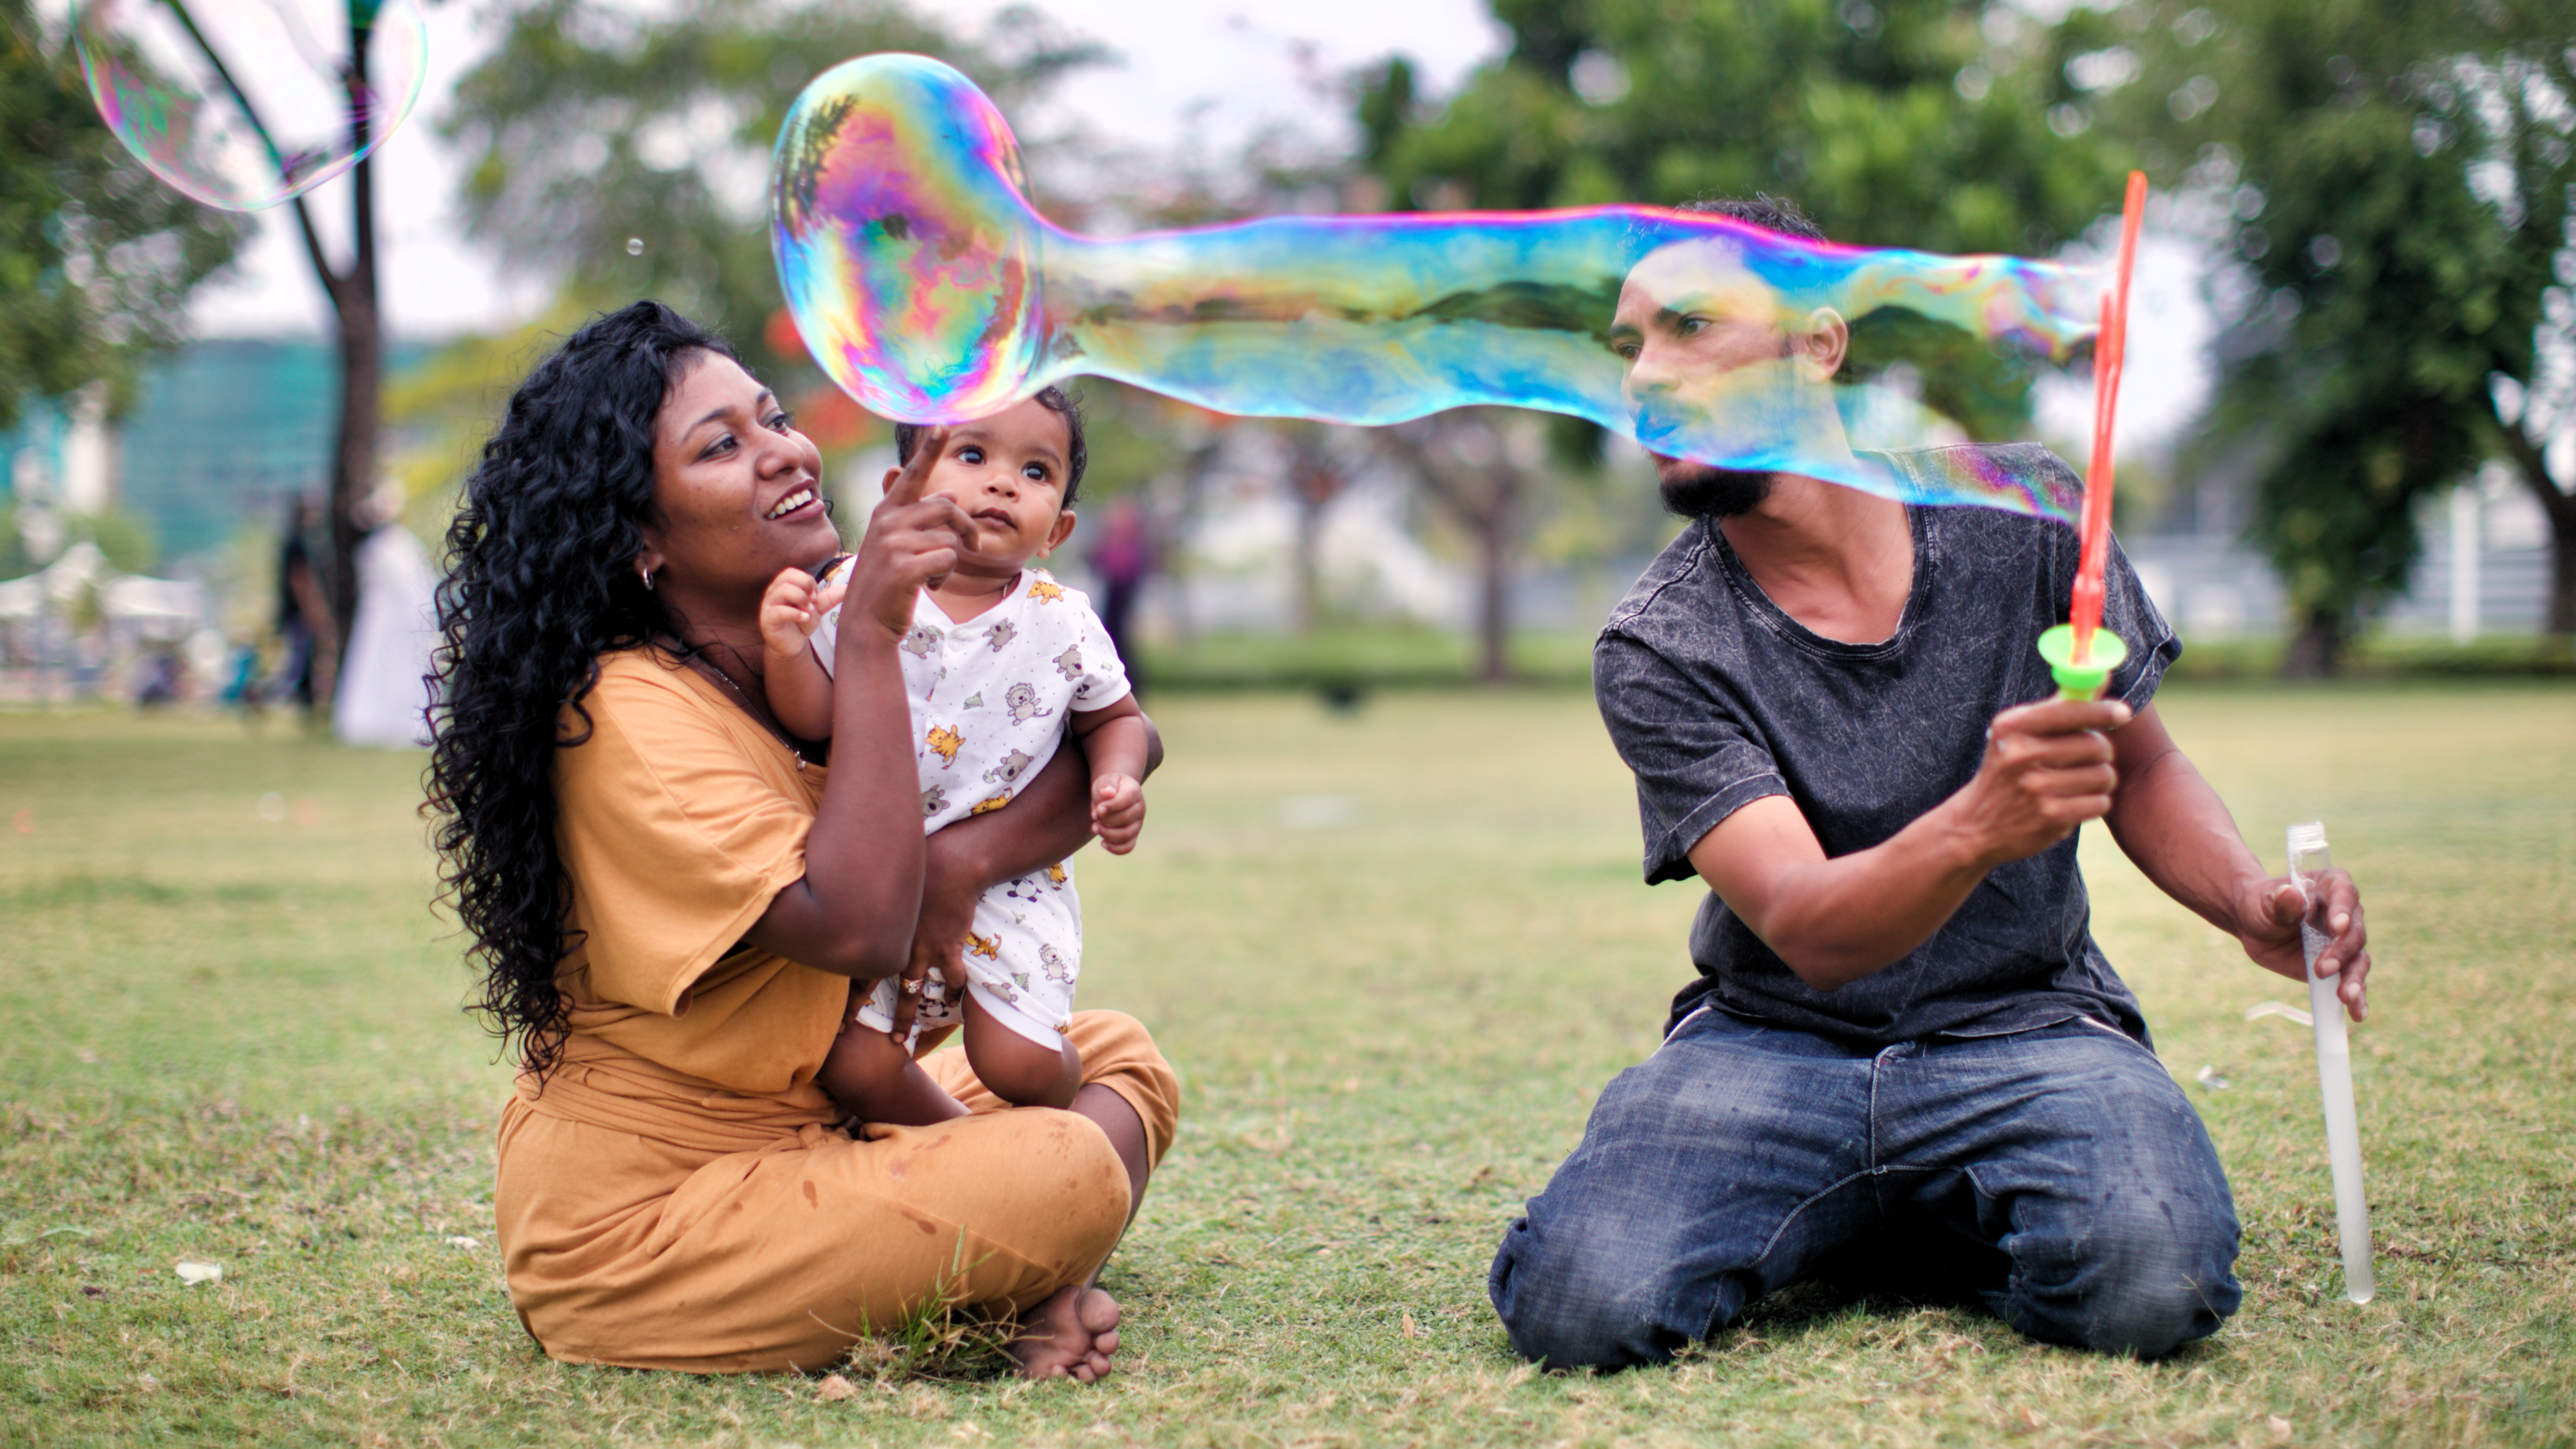 A family, mom holds a baby boy and the dad is blowing bubbles in the park